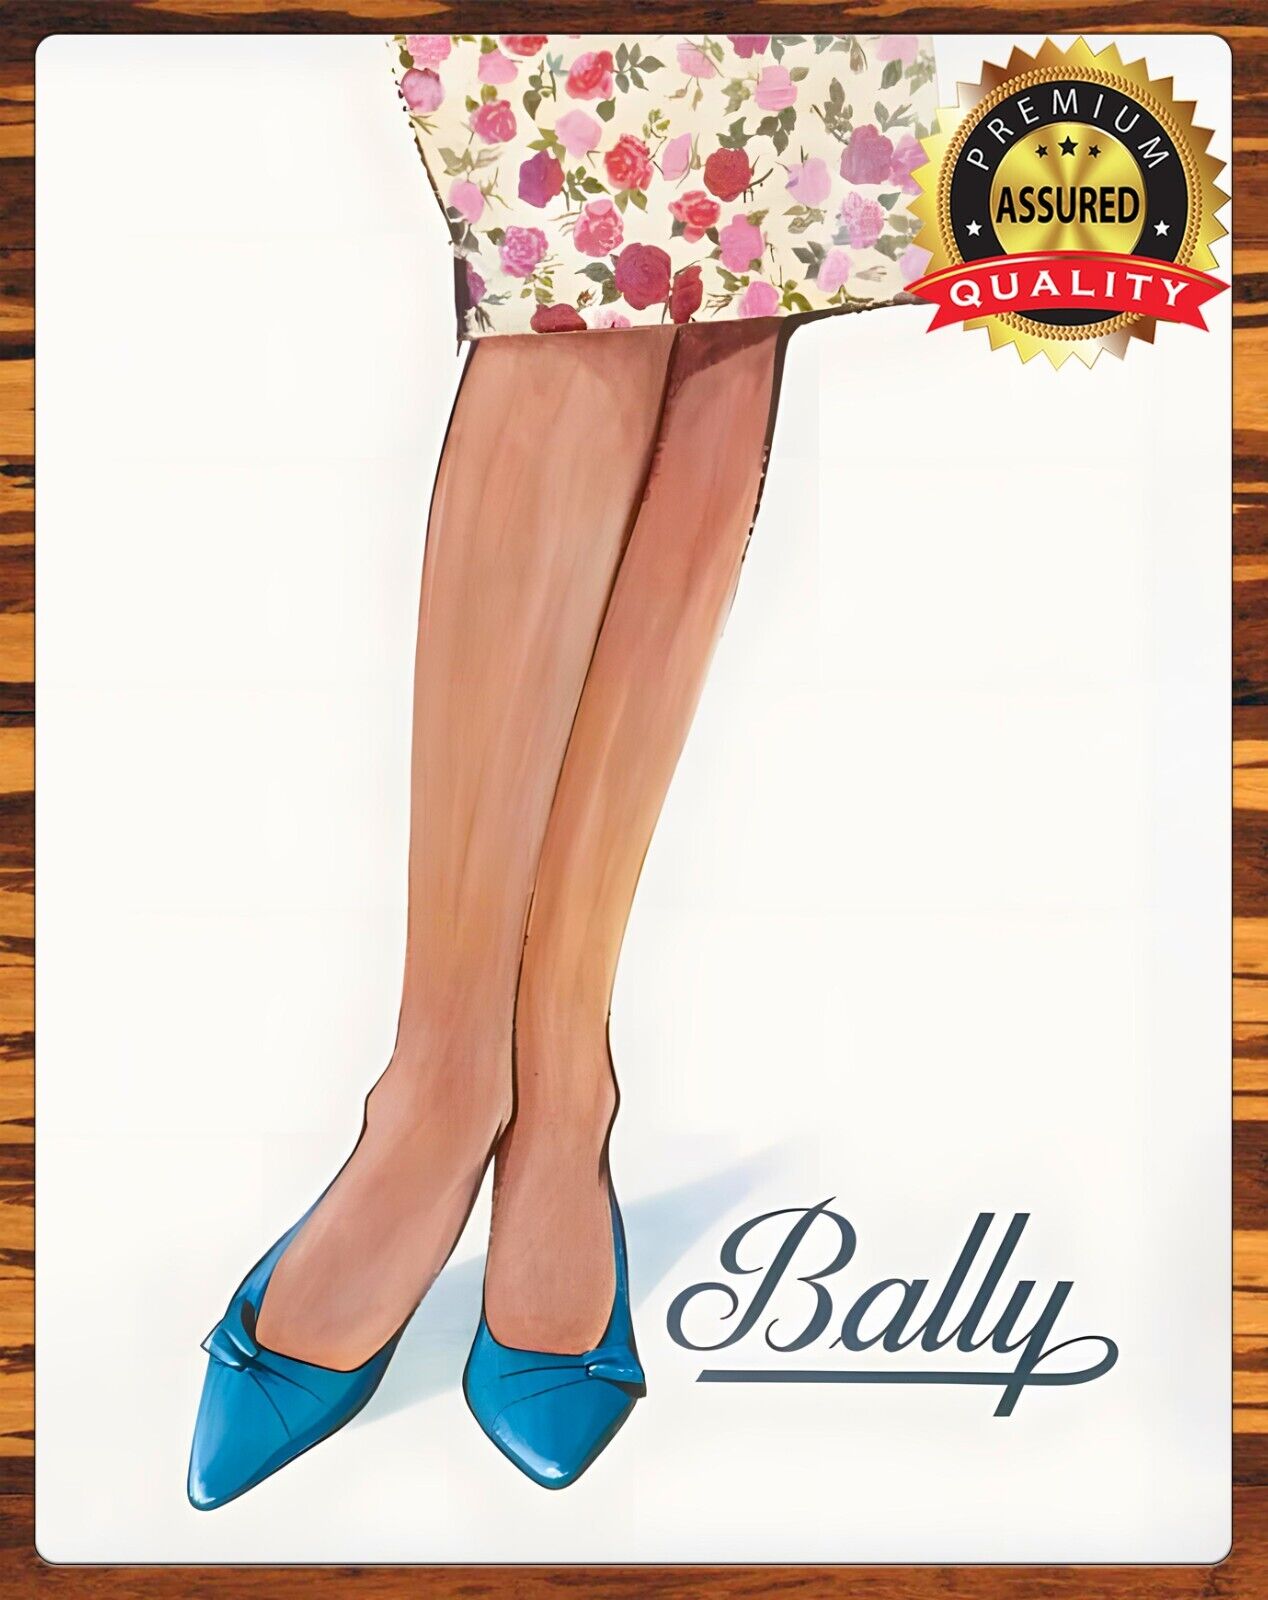 Zapatos - Bally Shoes - 1959 - Restored - Metal Sign 11 x 14